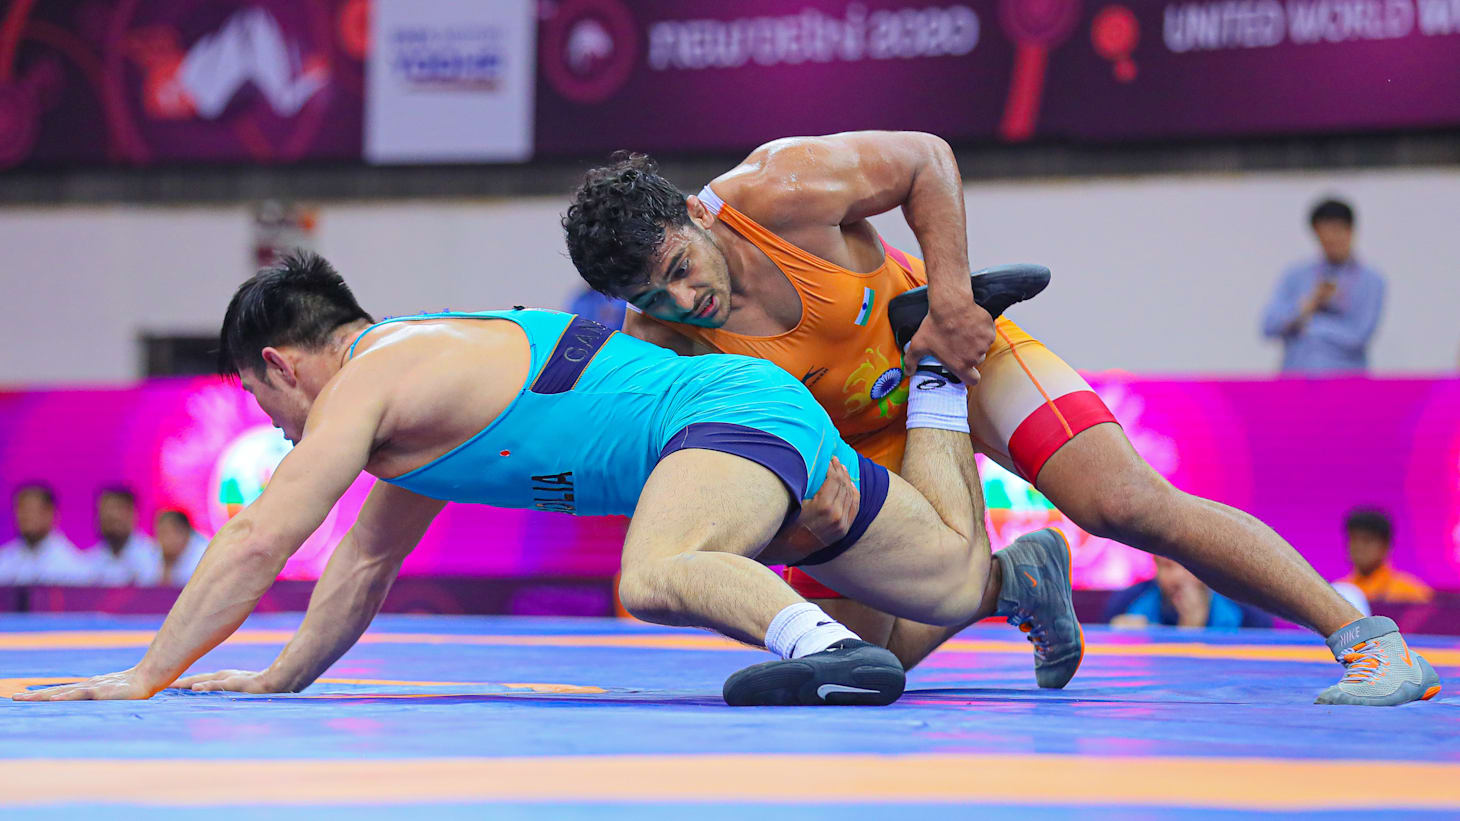 Deepak Punia in mens 86kg freestyle bronze medal match; watch live streaming and telecast in India